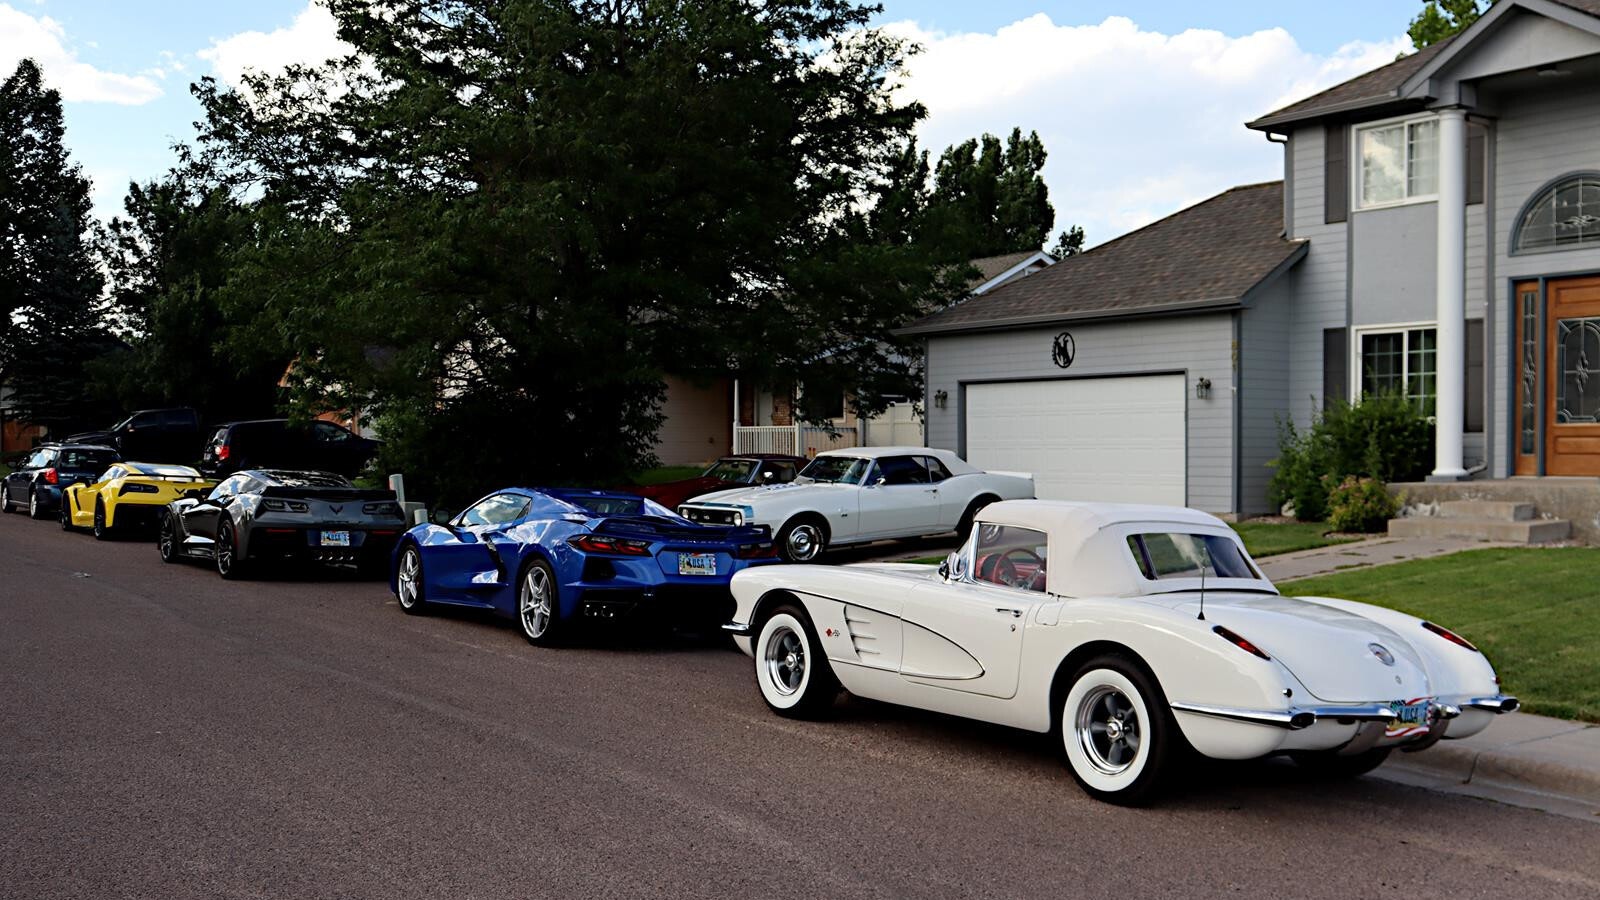 Alex Aragon's growing collection of Corvettes — and a 1968 Camaro SS.